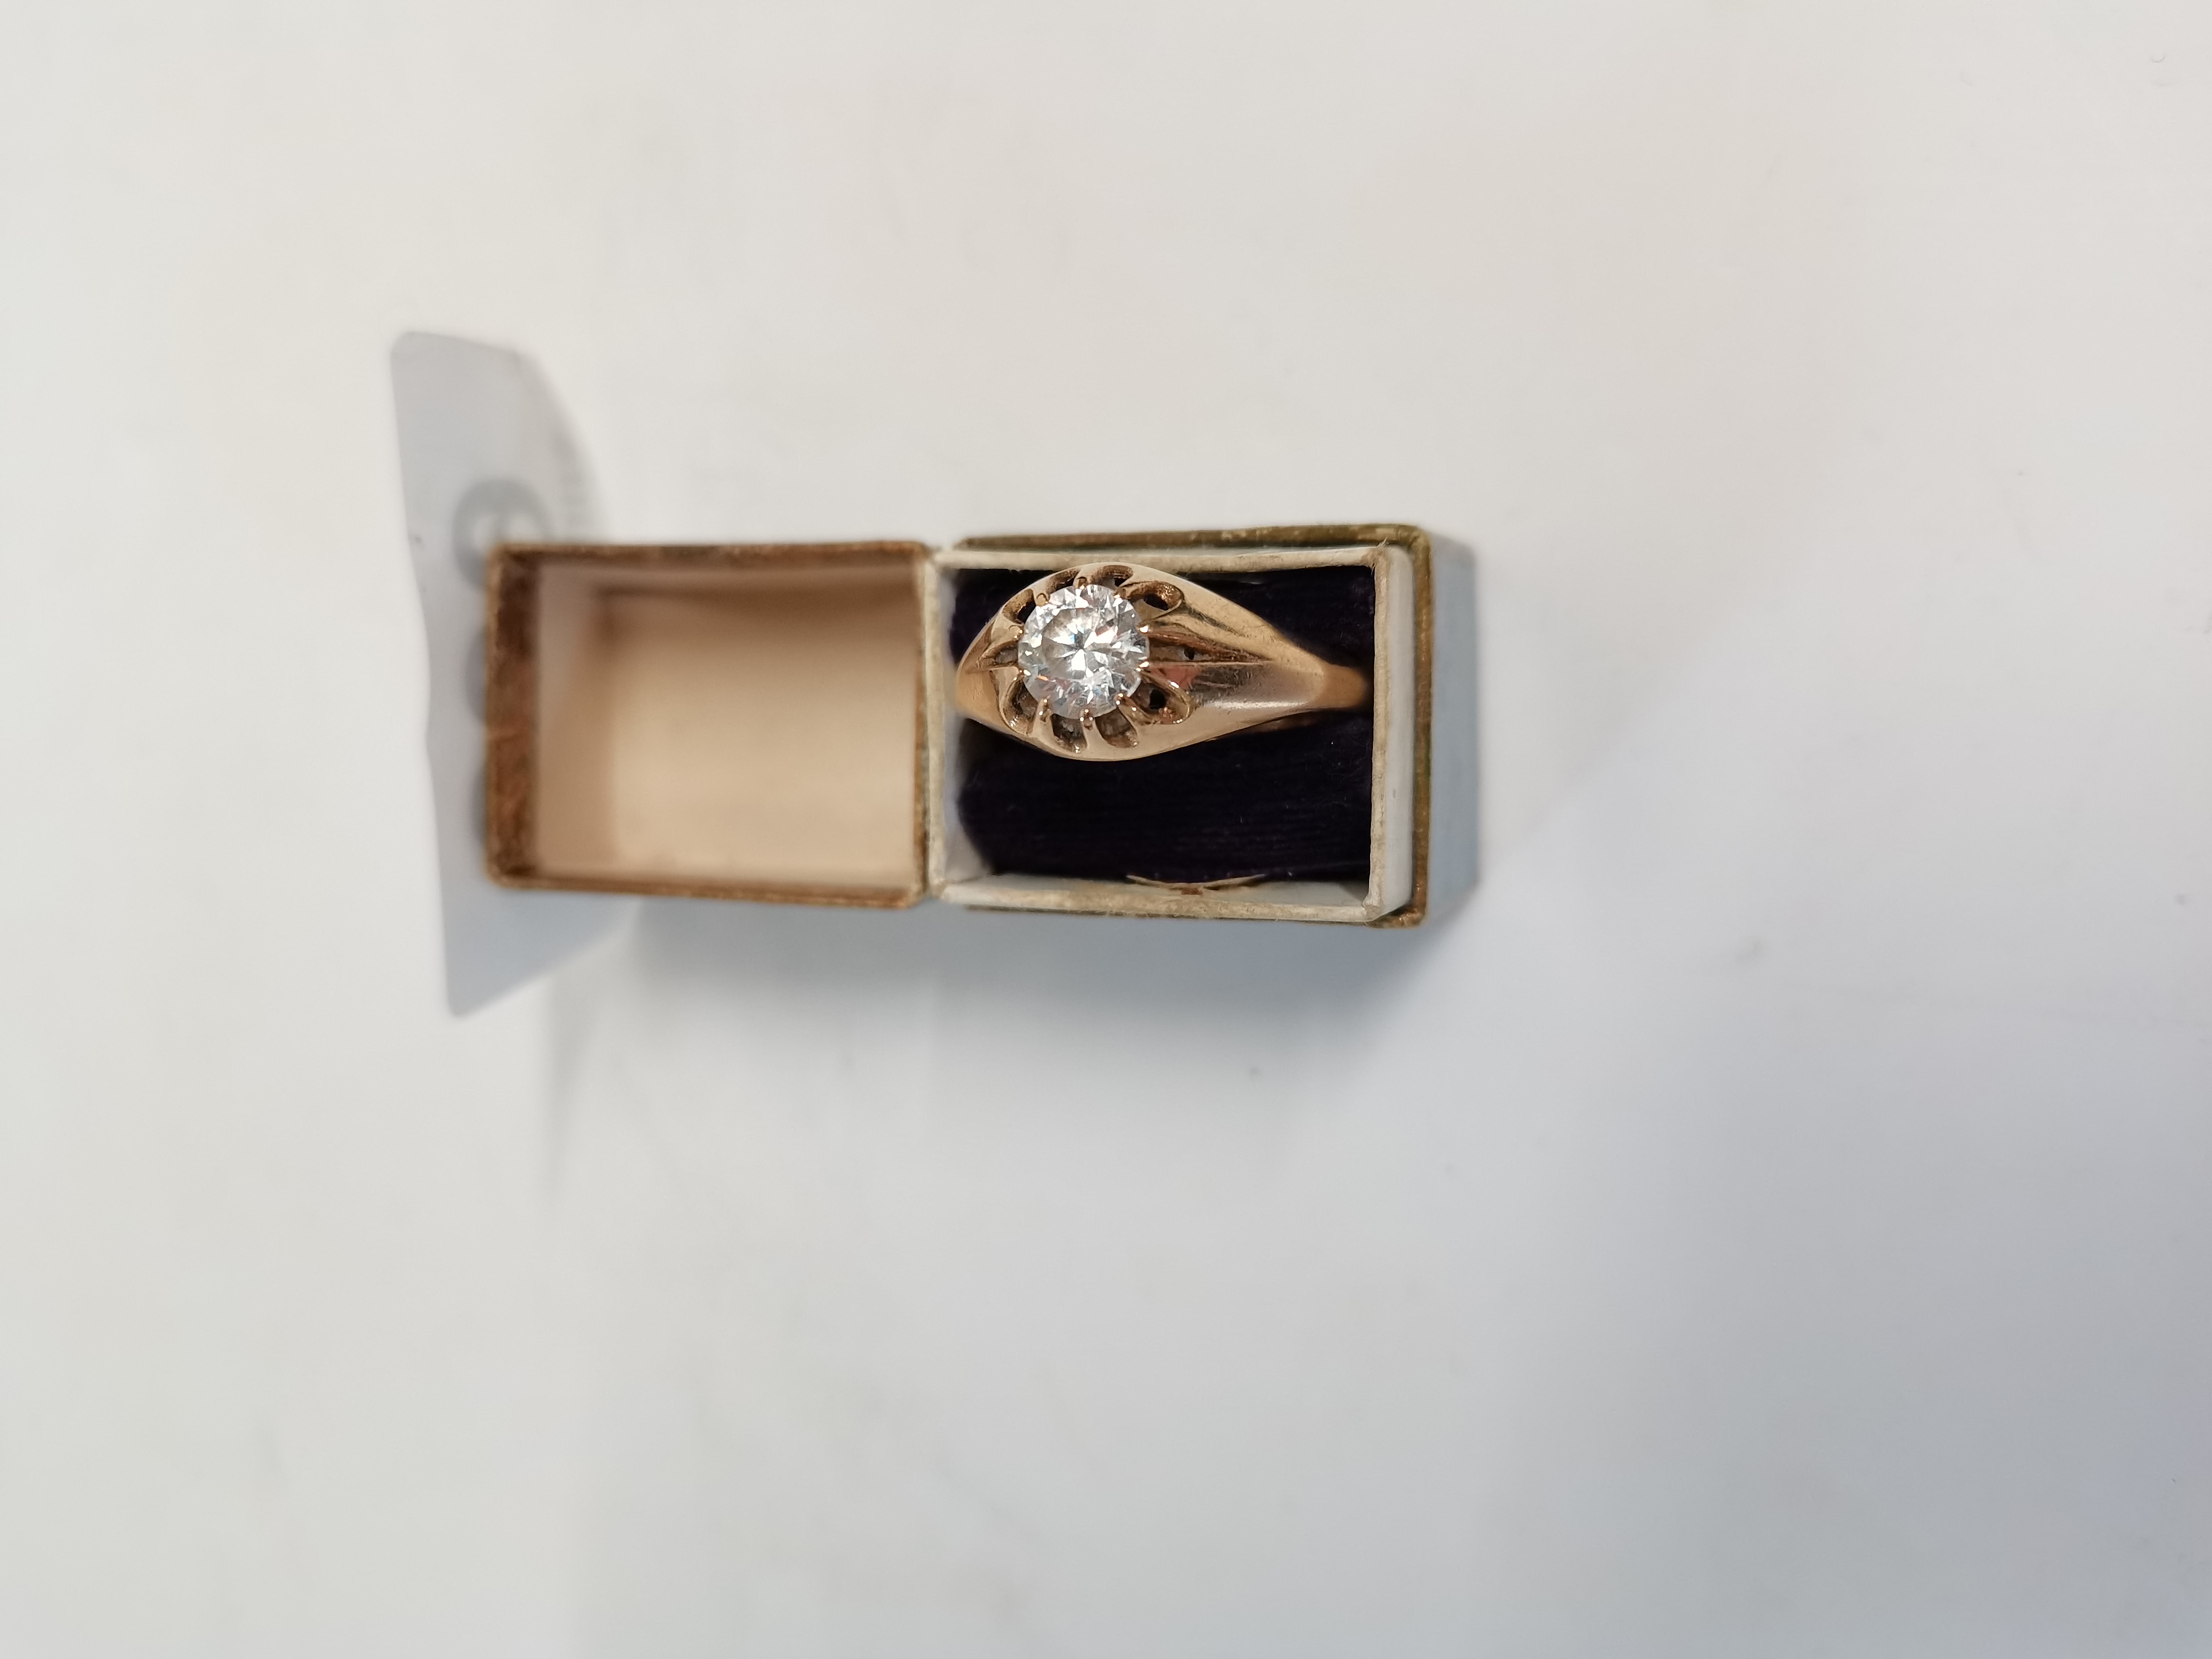 9ct gold gents Diamond Ring 3g - Image 2 of 4